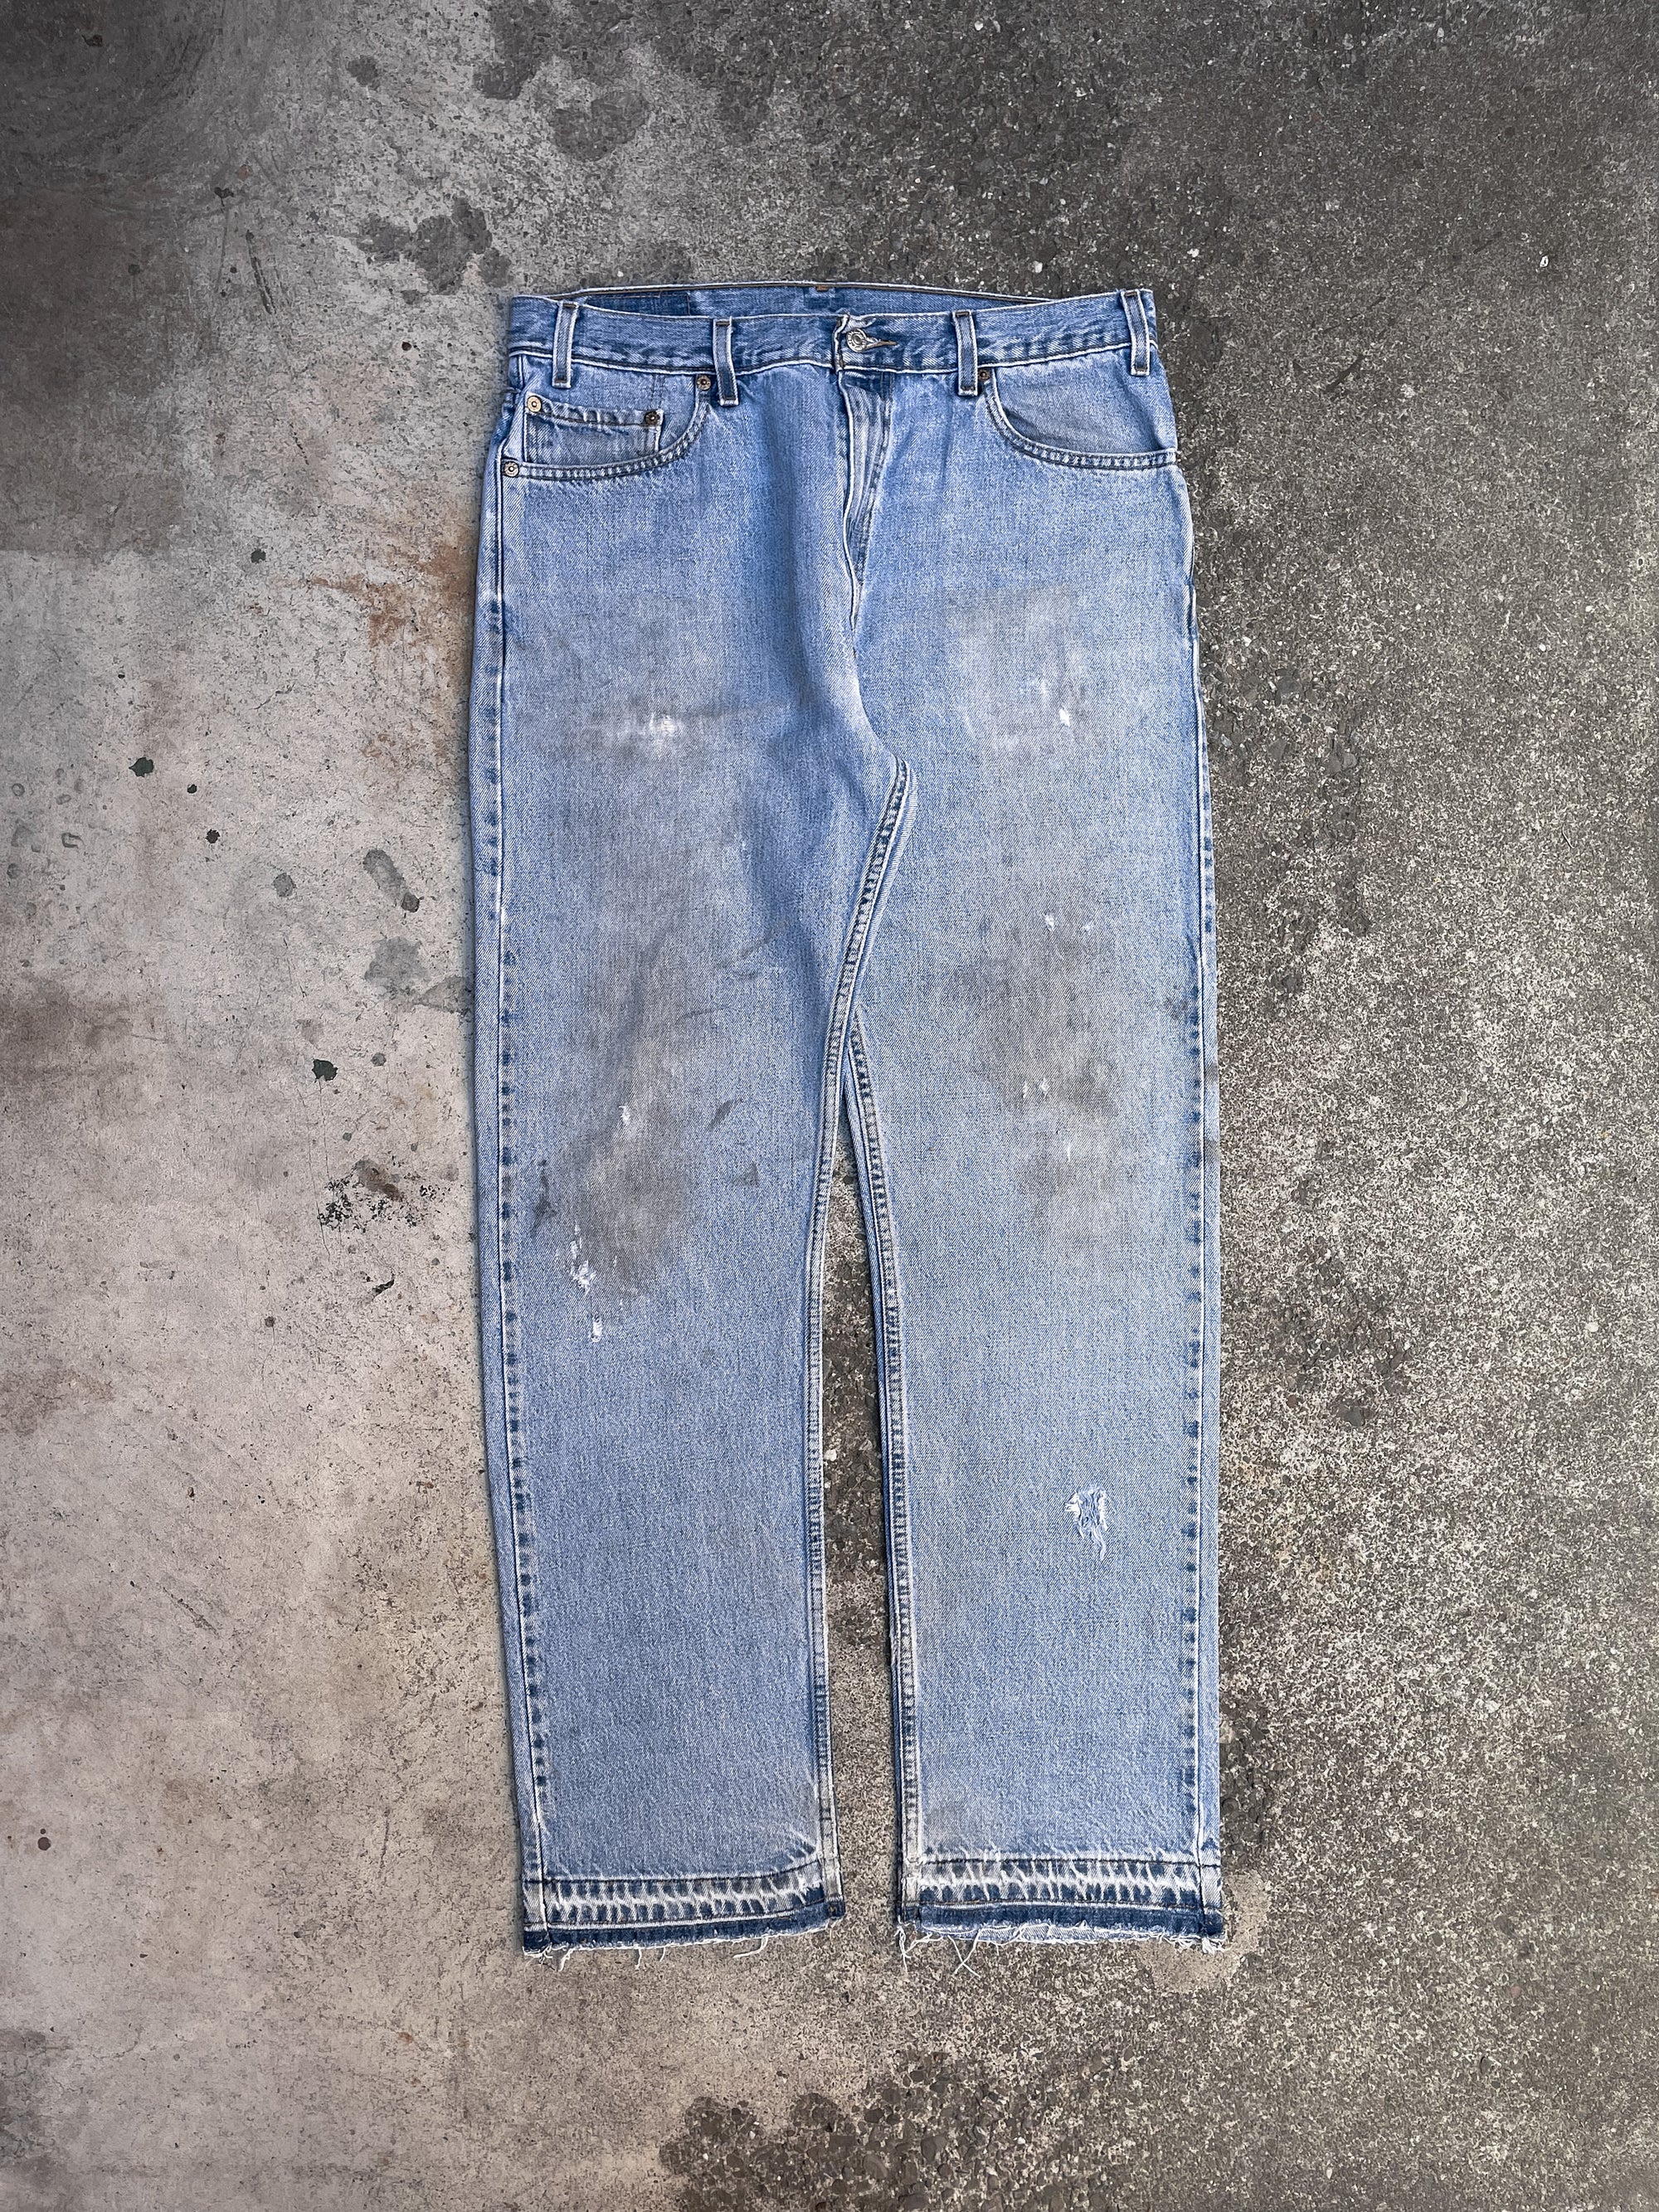 Vintage Levi’s Repaired Faded Blue 505 Released Hem (34X31)